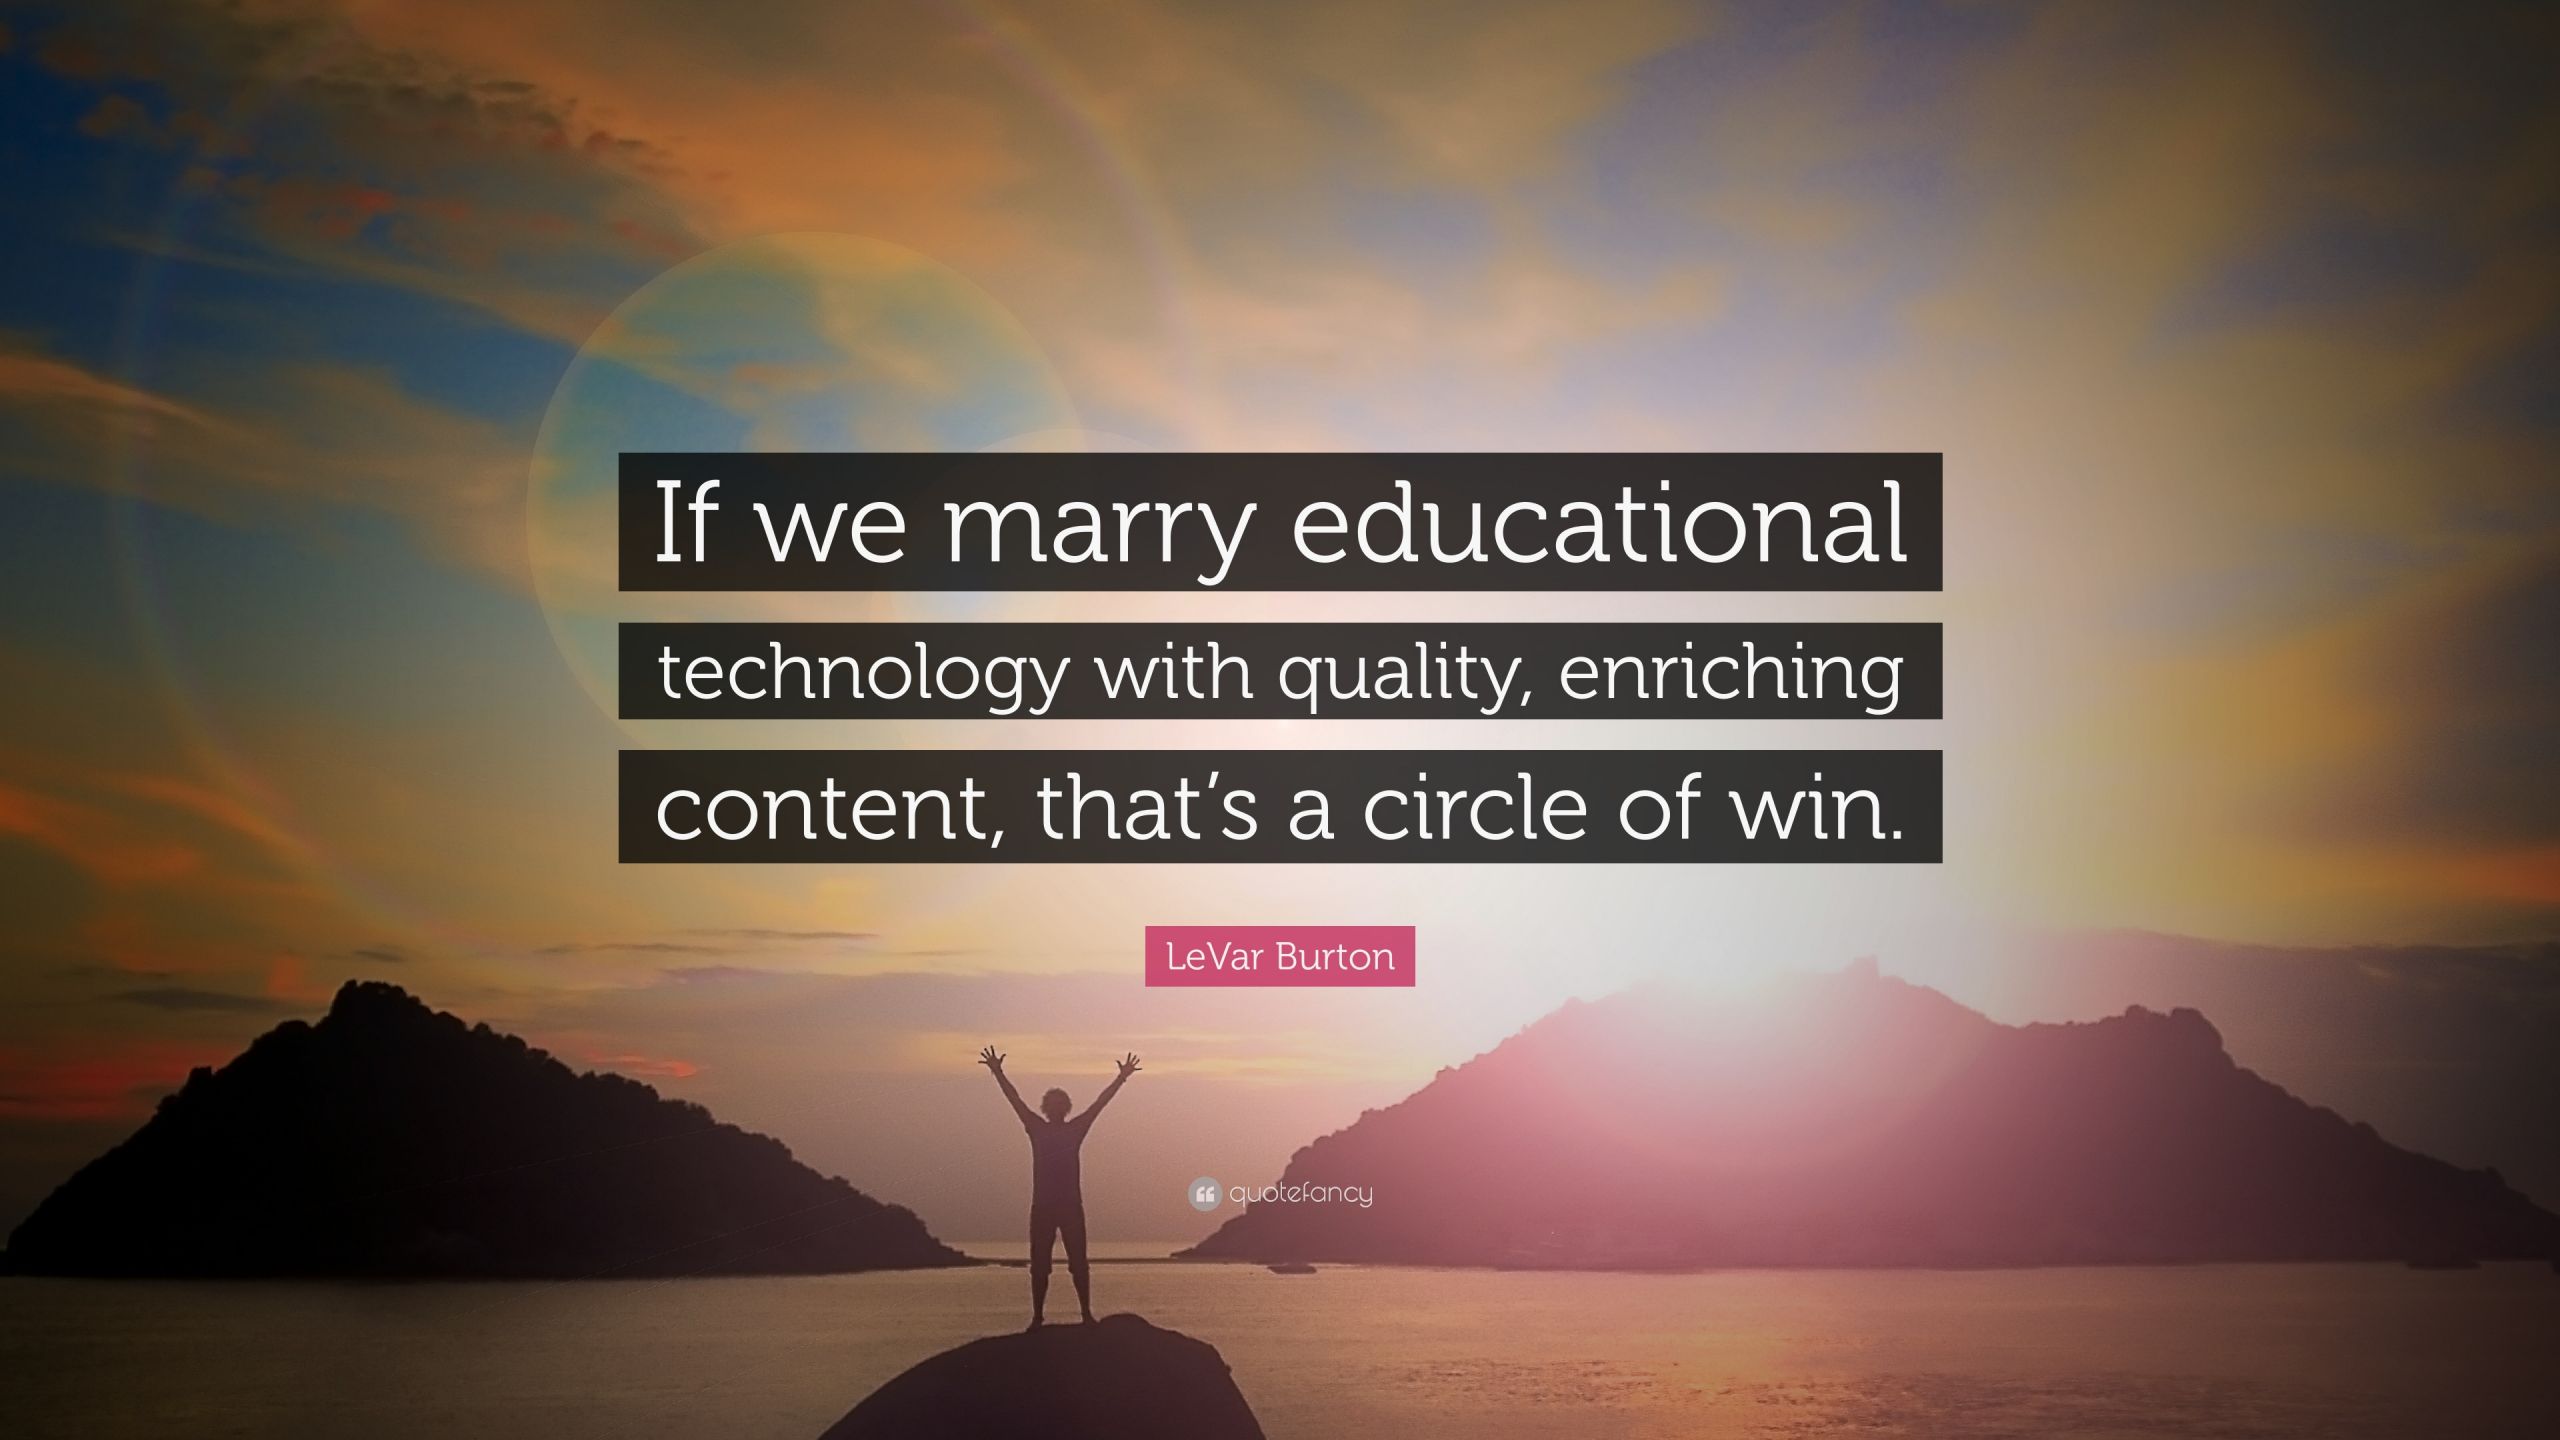 Technology And Education Quotes
 LeVar Burton Quote “If we marry educational technology